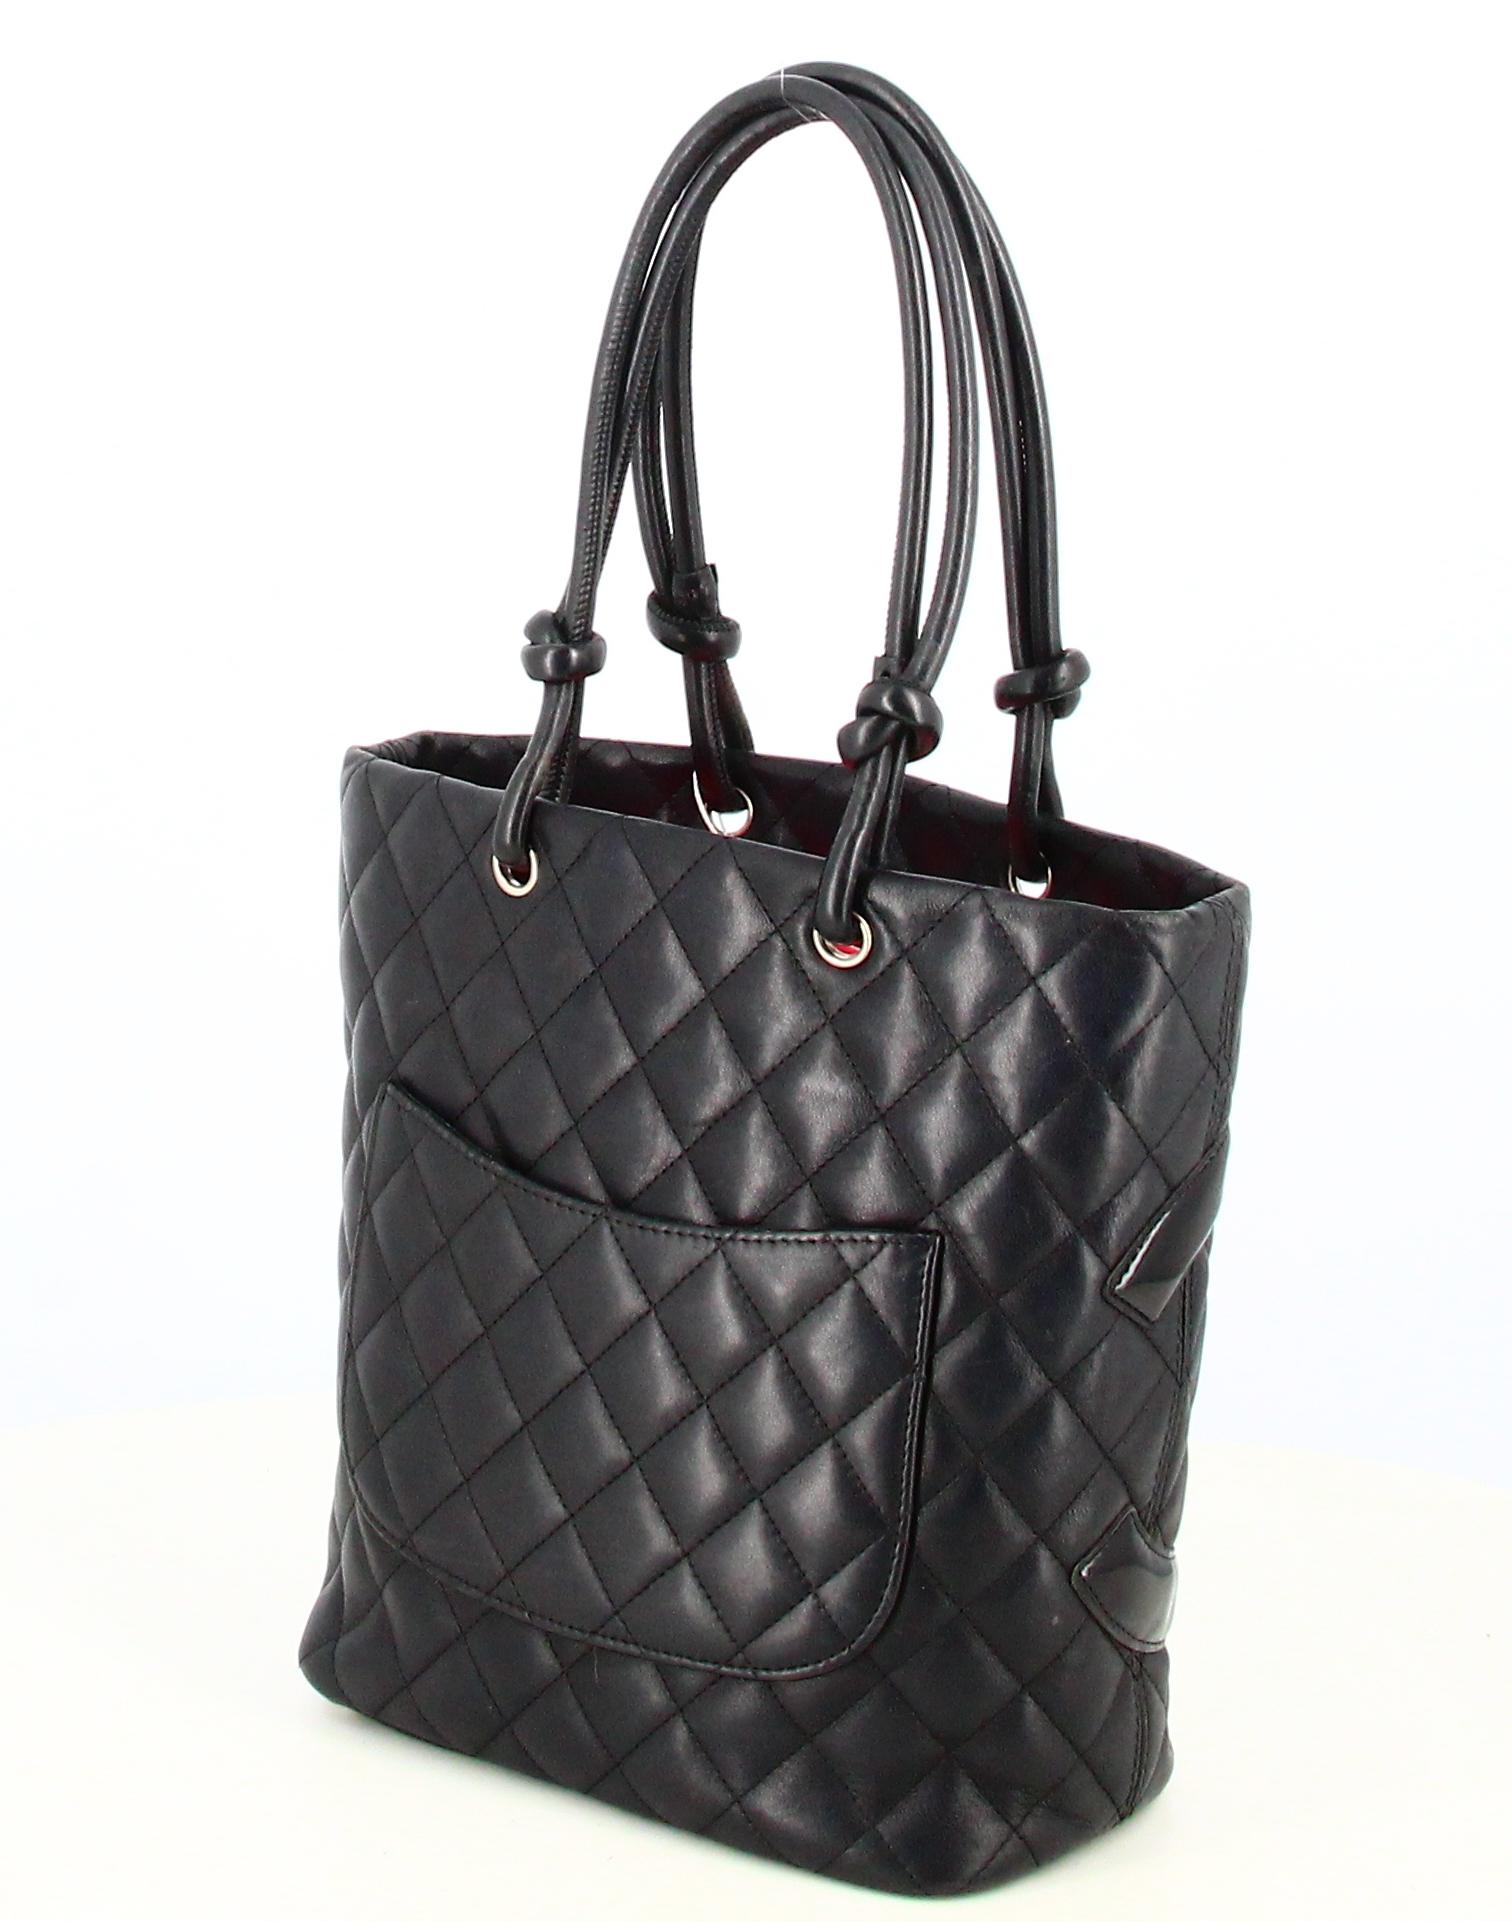 Chanel Cambon Handbag Black Quilted Leather For Sale 2